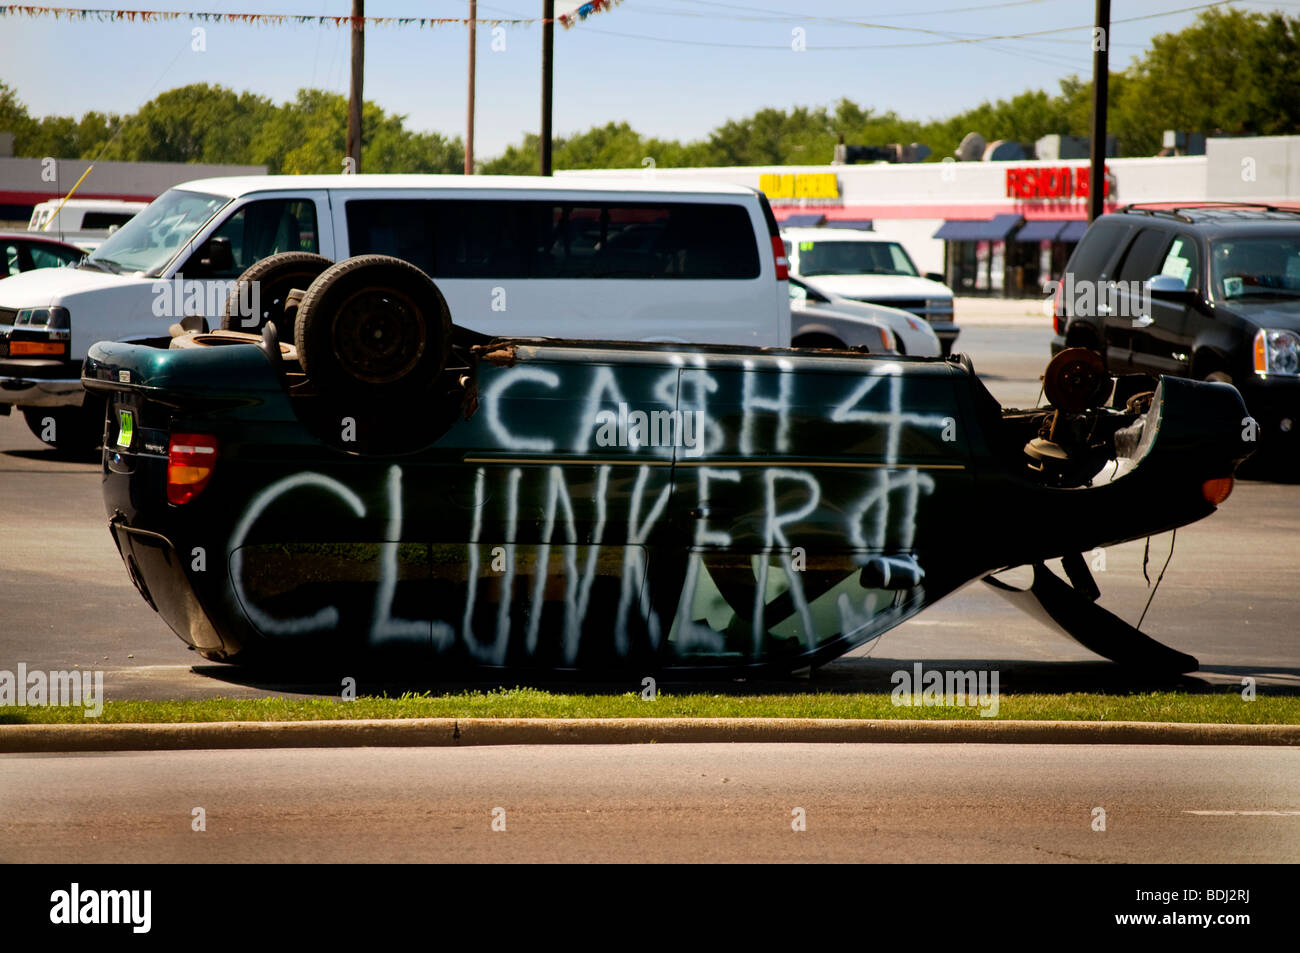 Sign advertising the Cash for Clunkers program Stock Photo